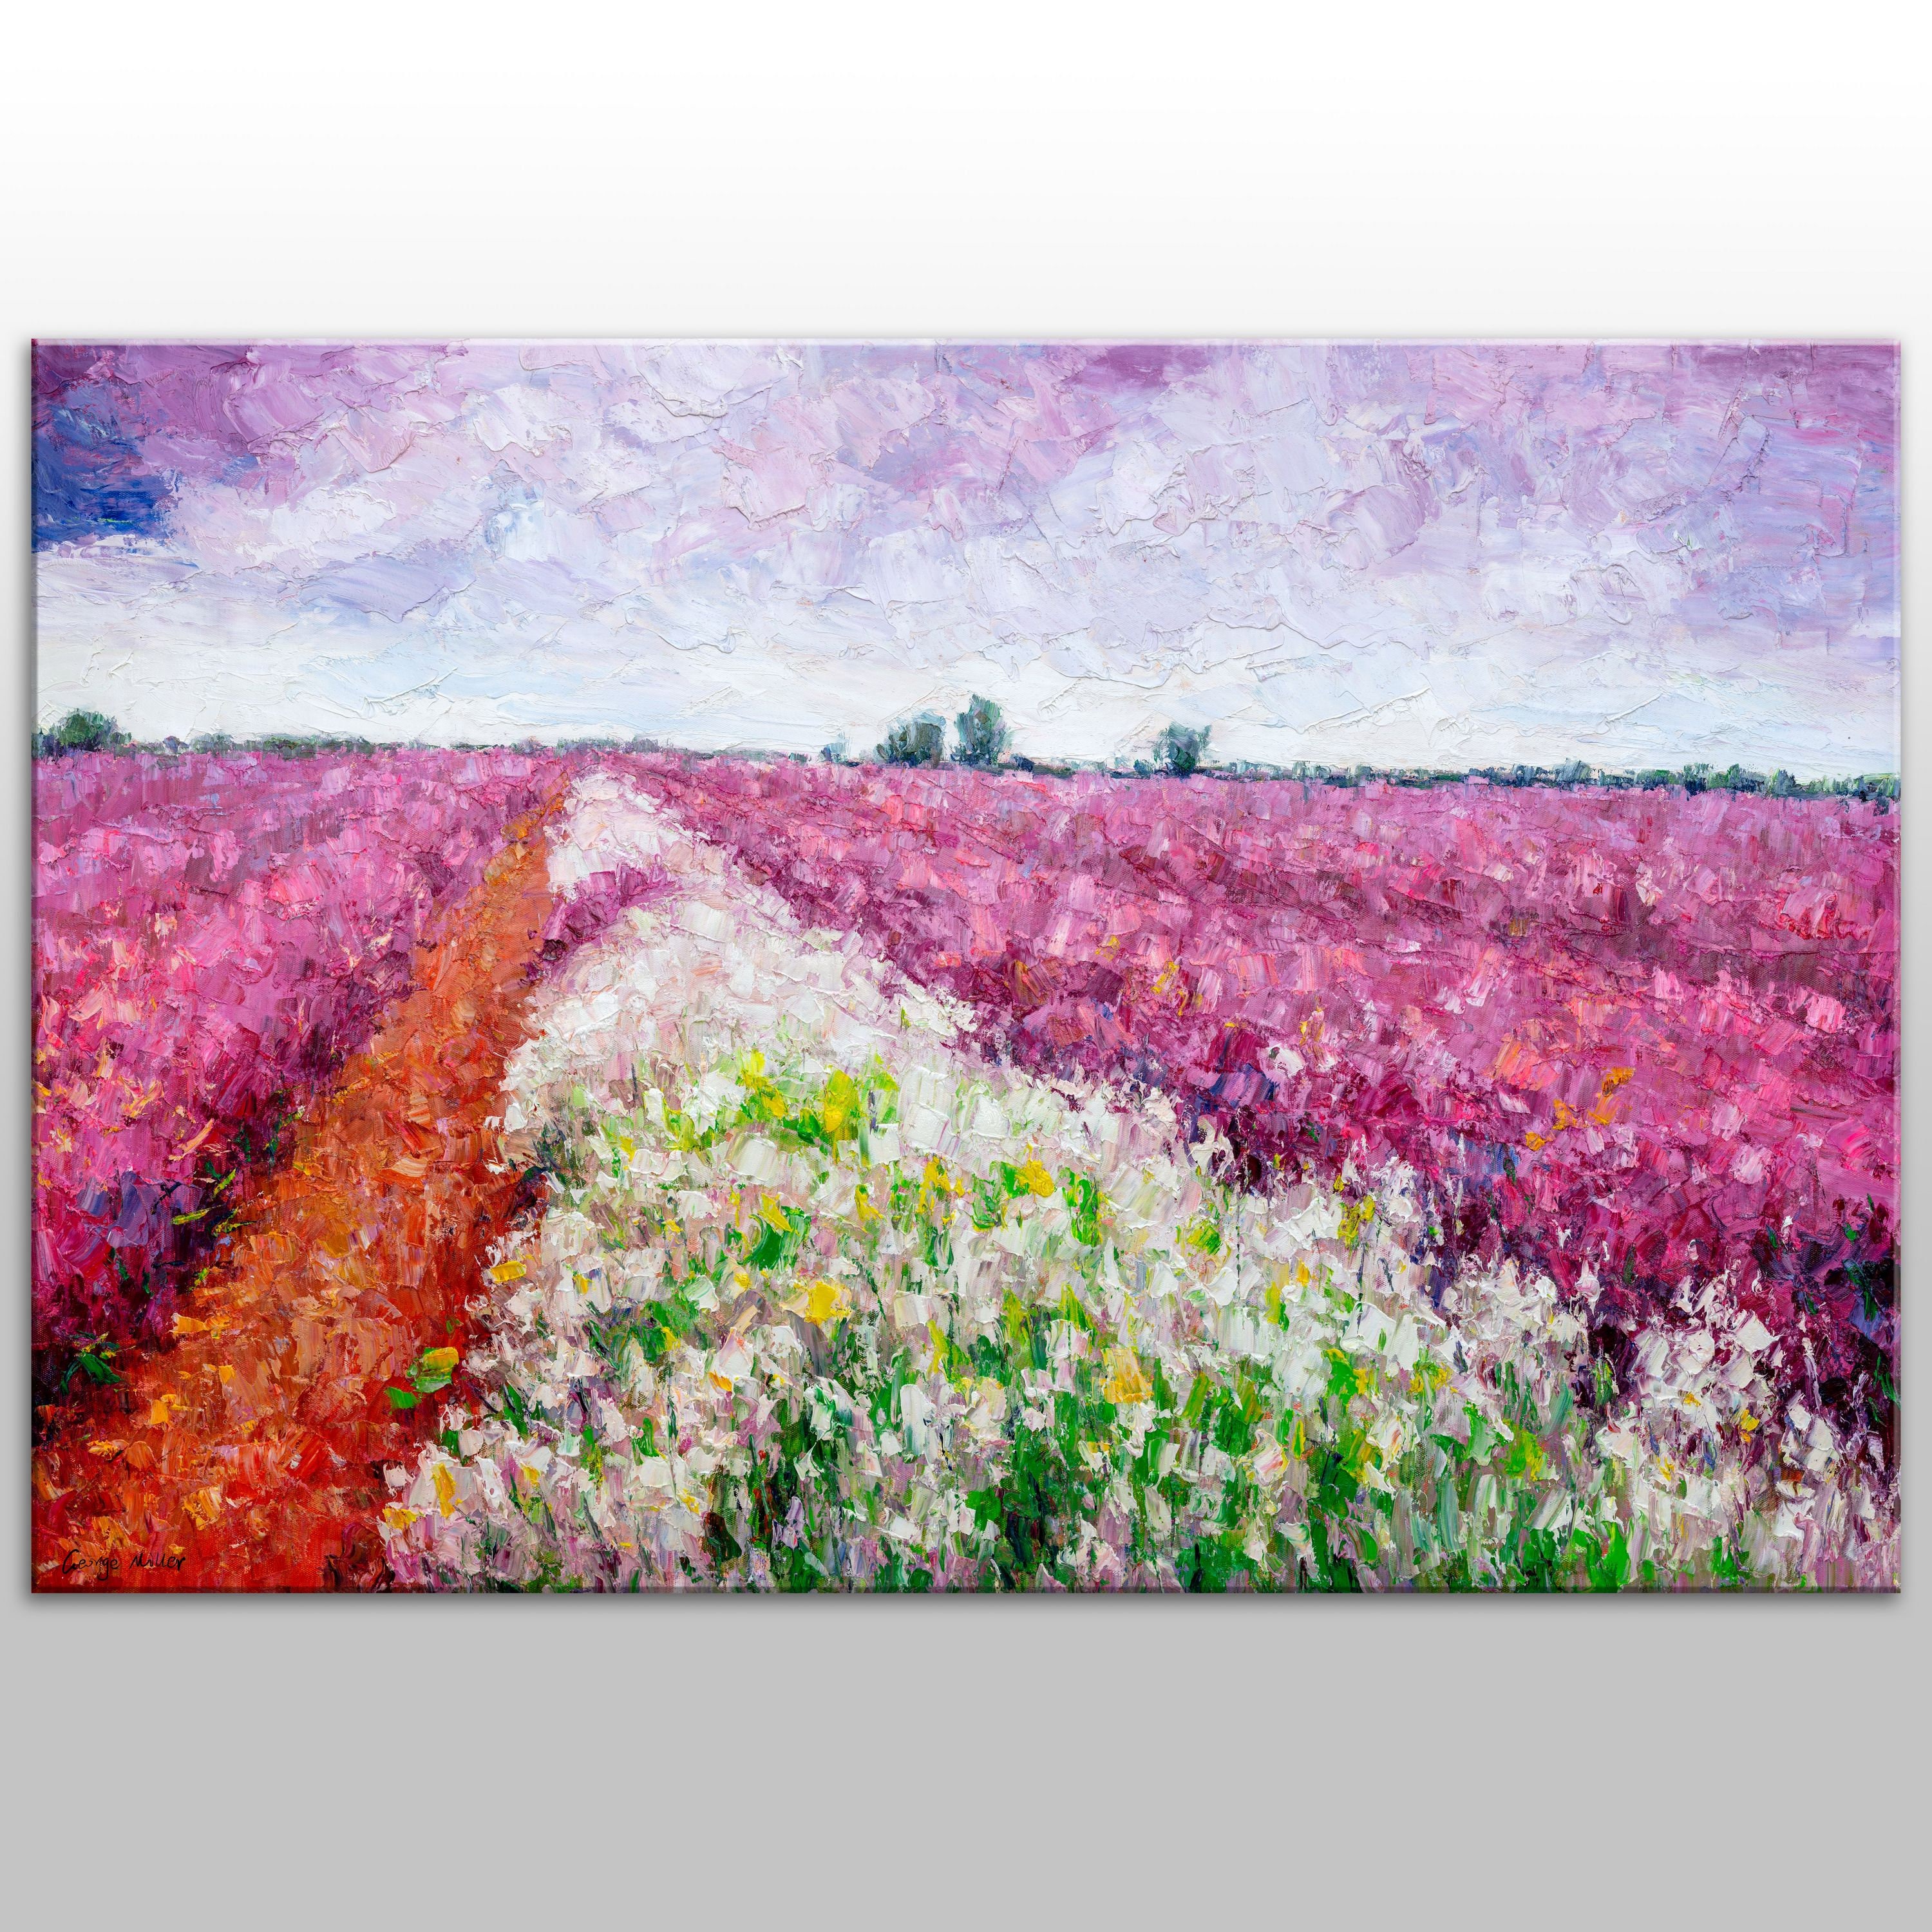 Bring the Outdoors Inside with this Handmade Flower Field Oil Painting, Ready-to-Hang on Your Wallthumbnail